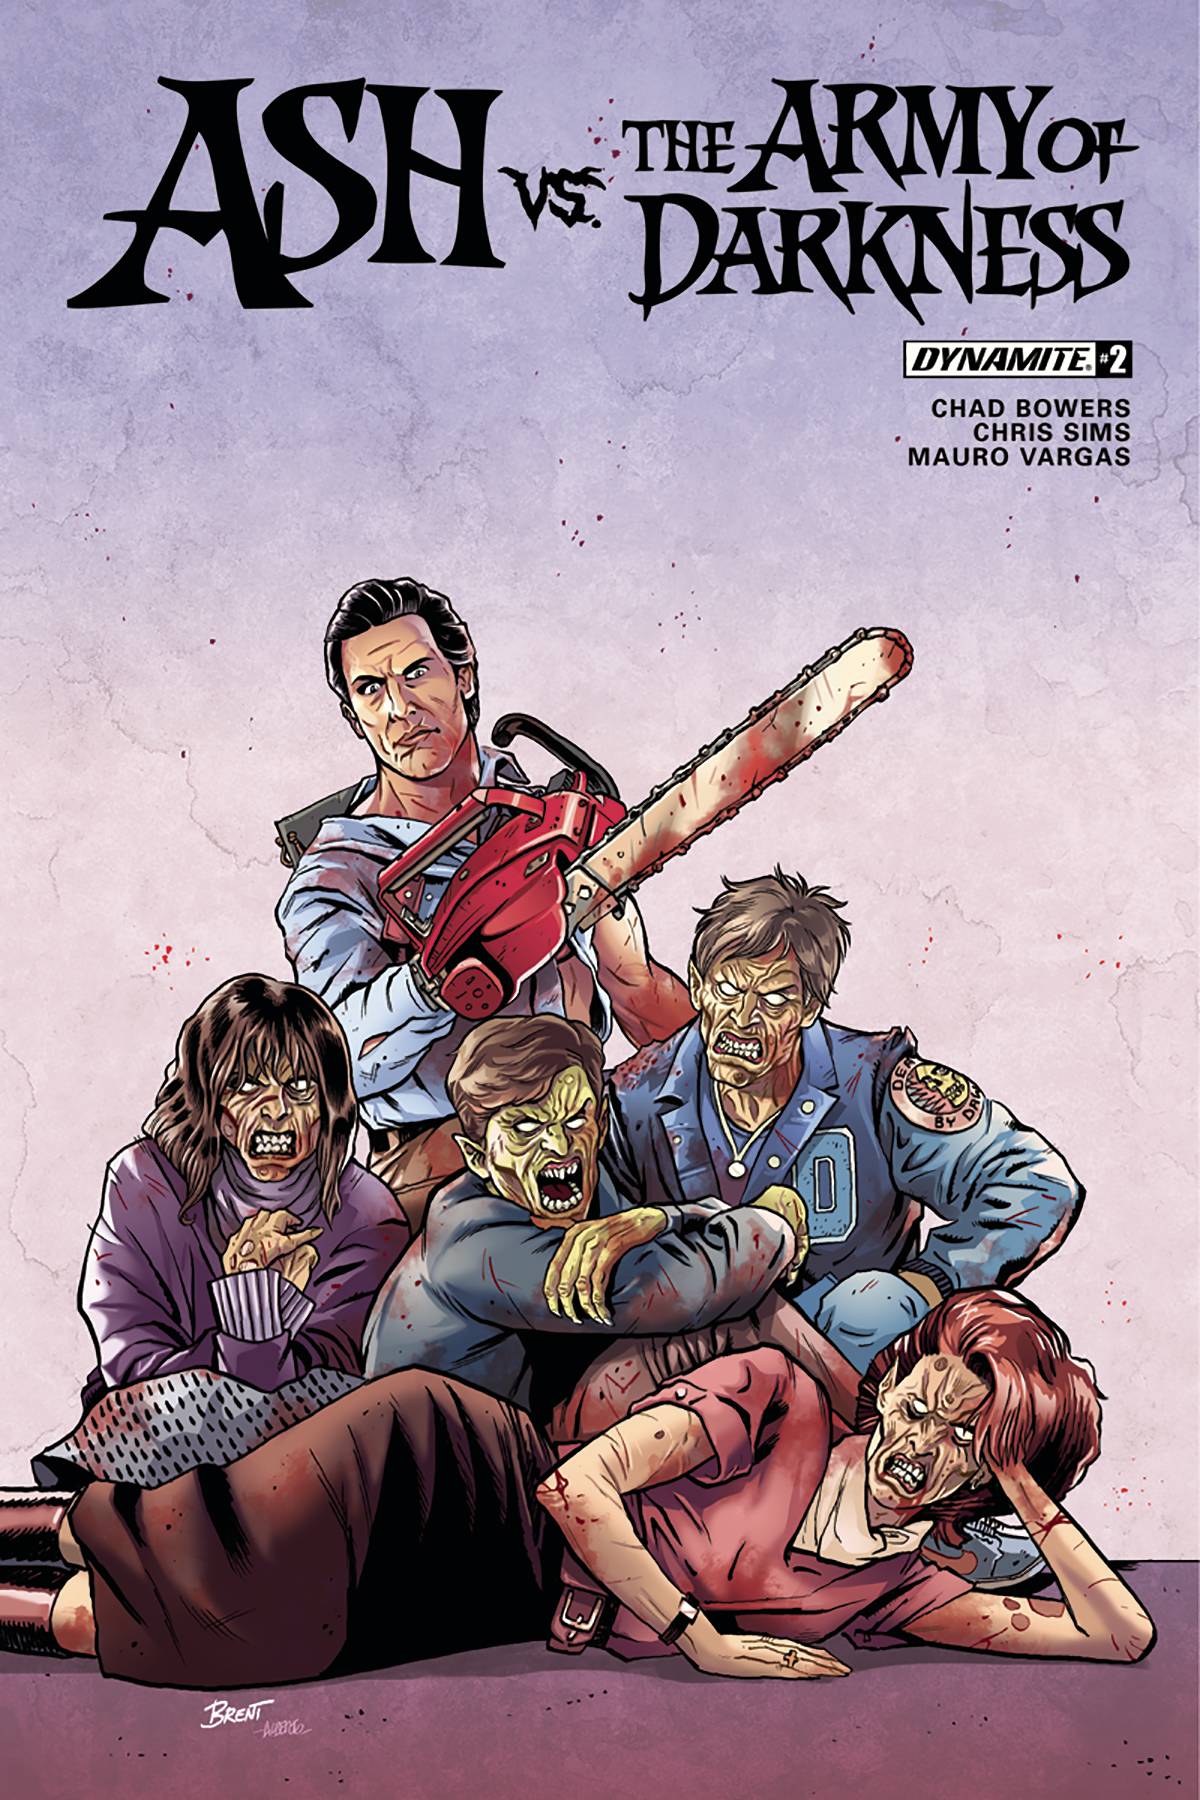 ASH VS. THE ARMY OF DARKNESS#2